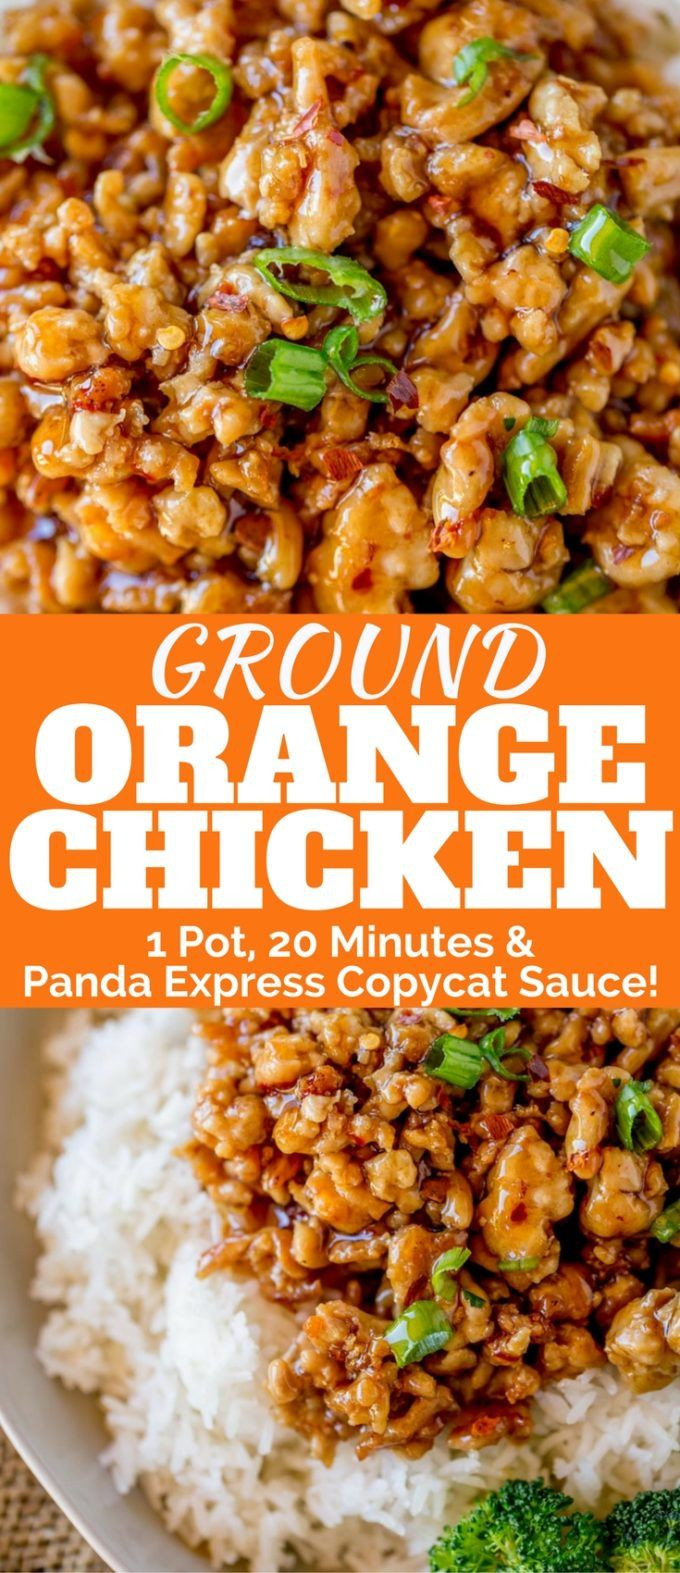 Recipes Using Ground Chicken
 Ground Orange Chicken is made in one pan and only takes 20